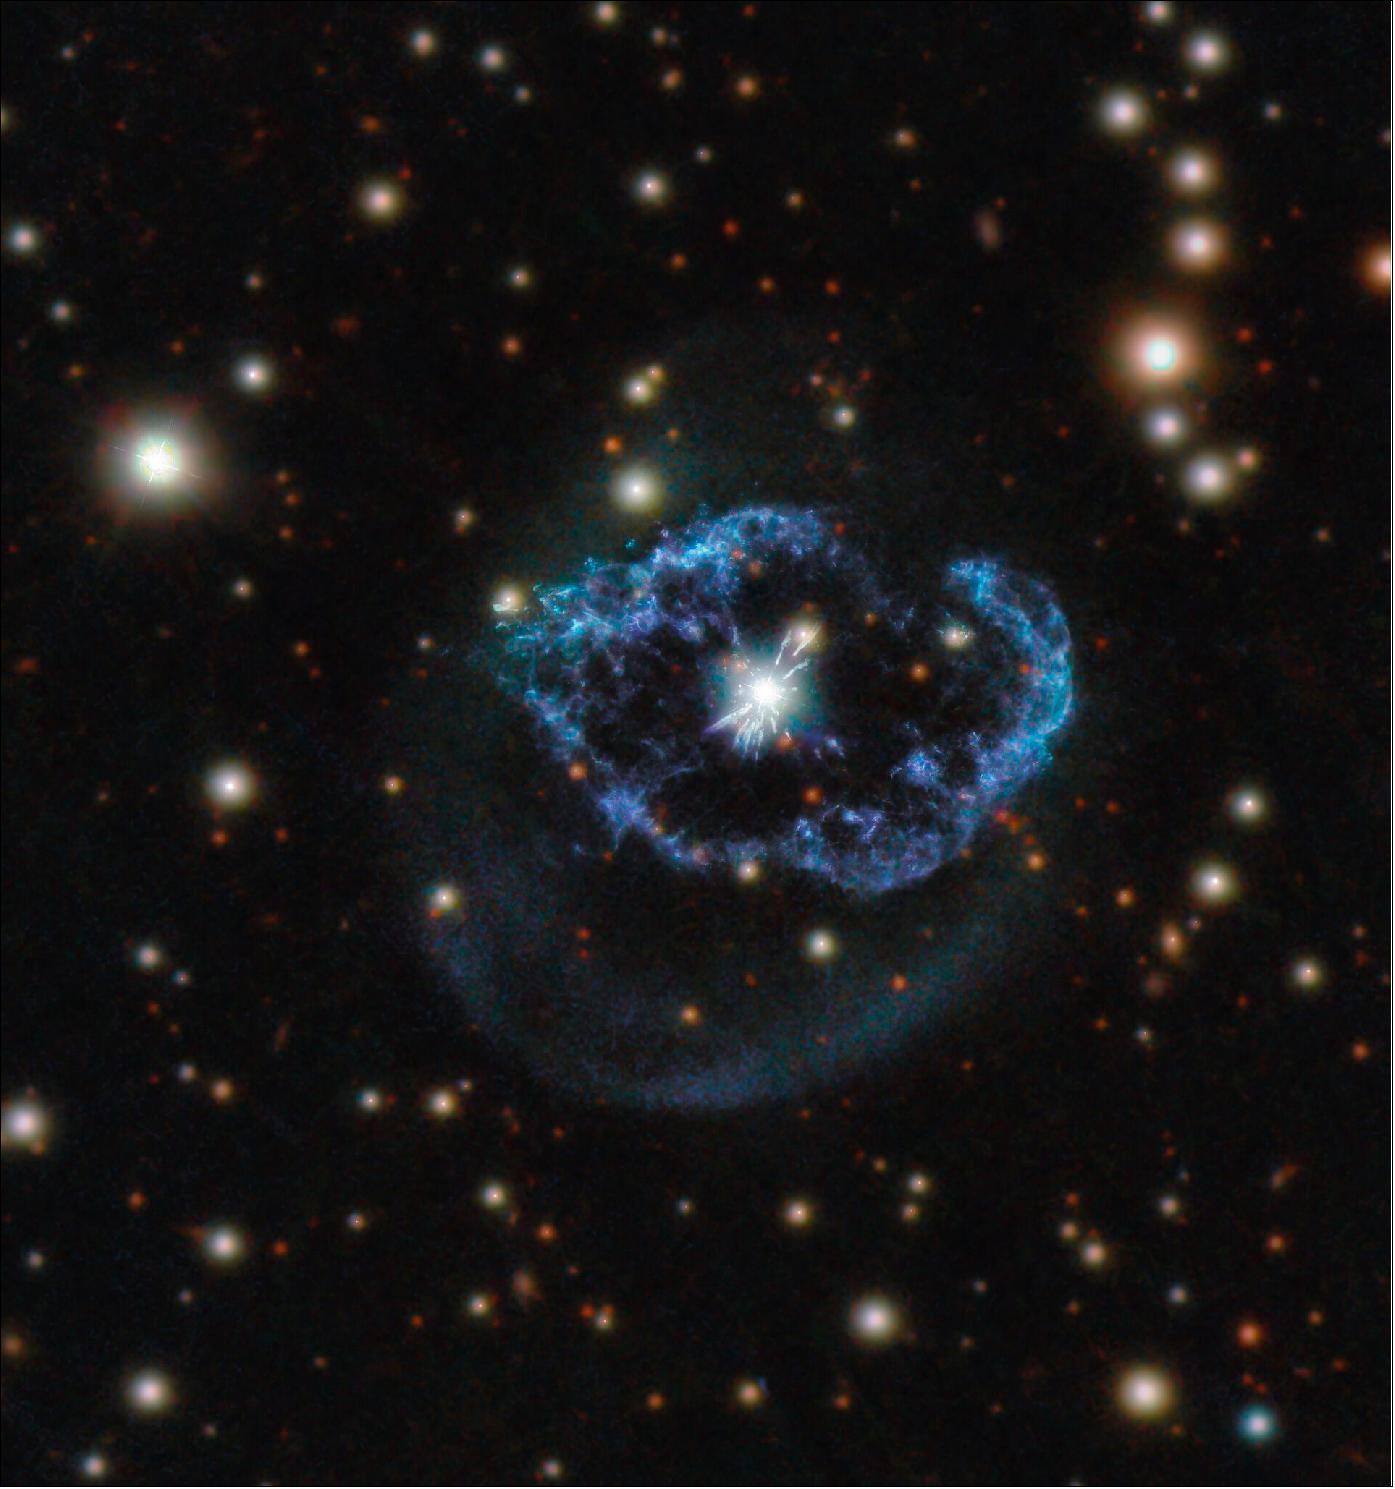 Figure 102: Planetary nebula Abell 78 captured by the Hubble Space Telescopes's Wide Field Camera 3 and PANSTARSS (image credit: ESA/Hubble & NASA, M. Guerrero, CC BY 40, Acknowledgement: Judy Schmidt)